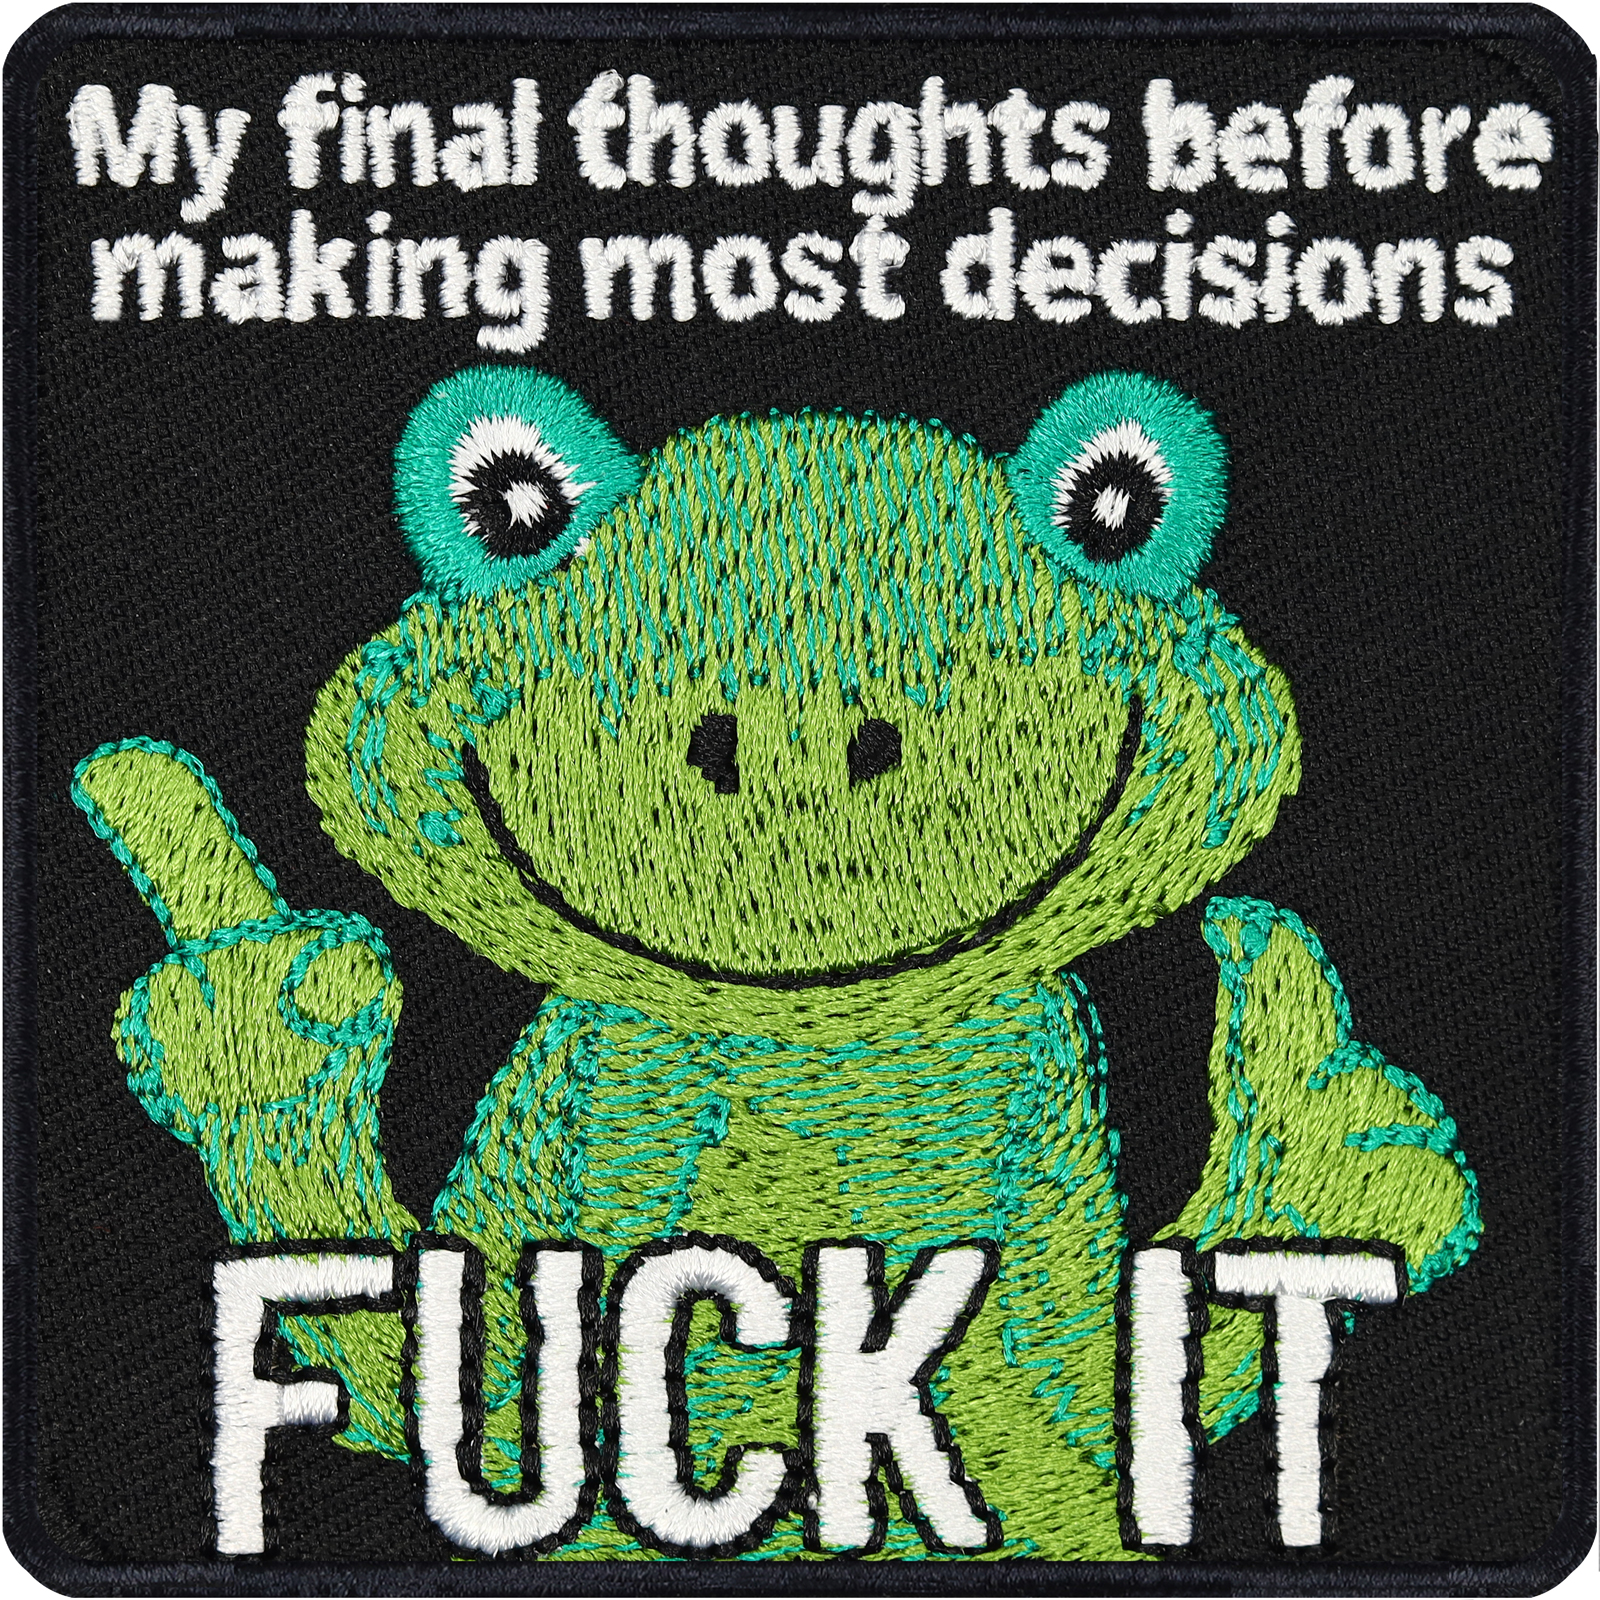 My final thoughts before making decisions - Fuck it - Patch